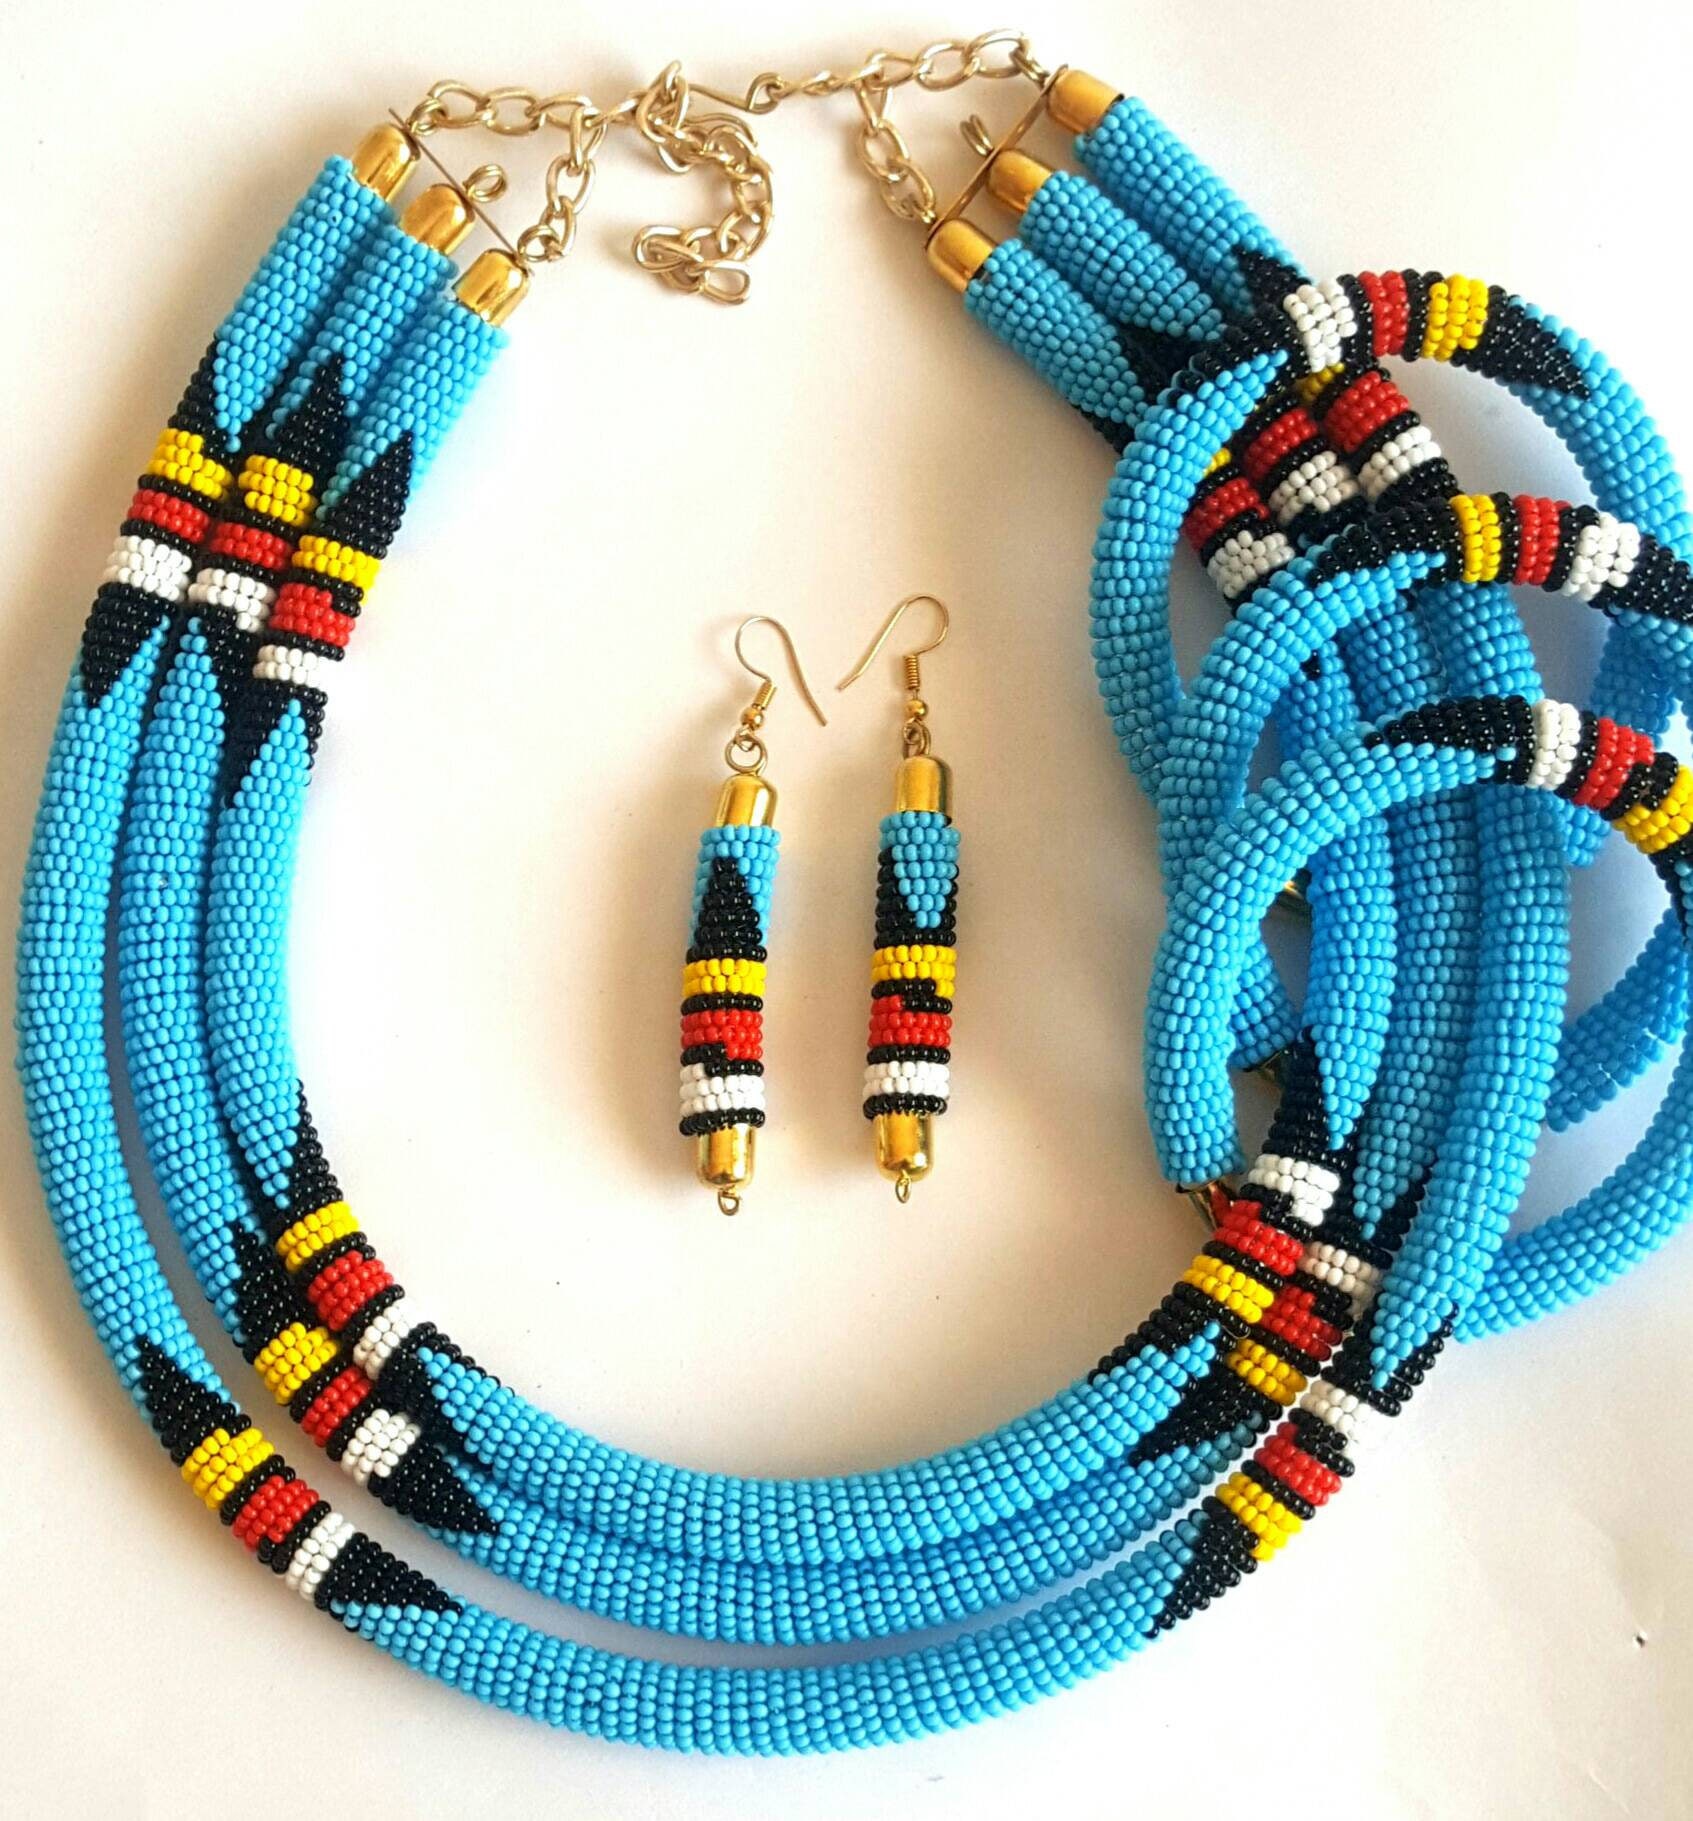 Africa Beads Necklace/maasai Necklace/beads Necklace With Bracelet/necklace  for Women/tribal Beads Necklace/necklace & Bracelet Set. - Etsy